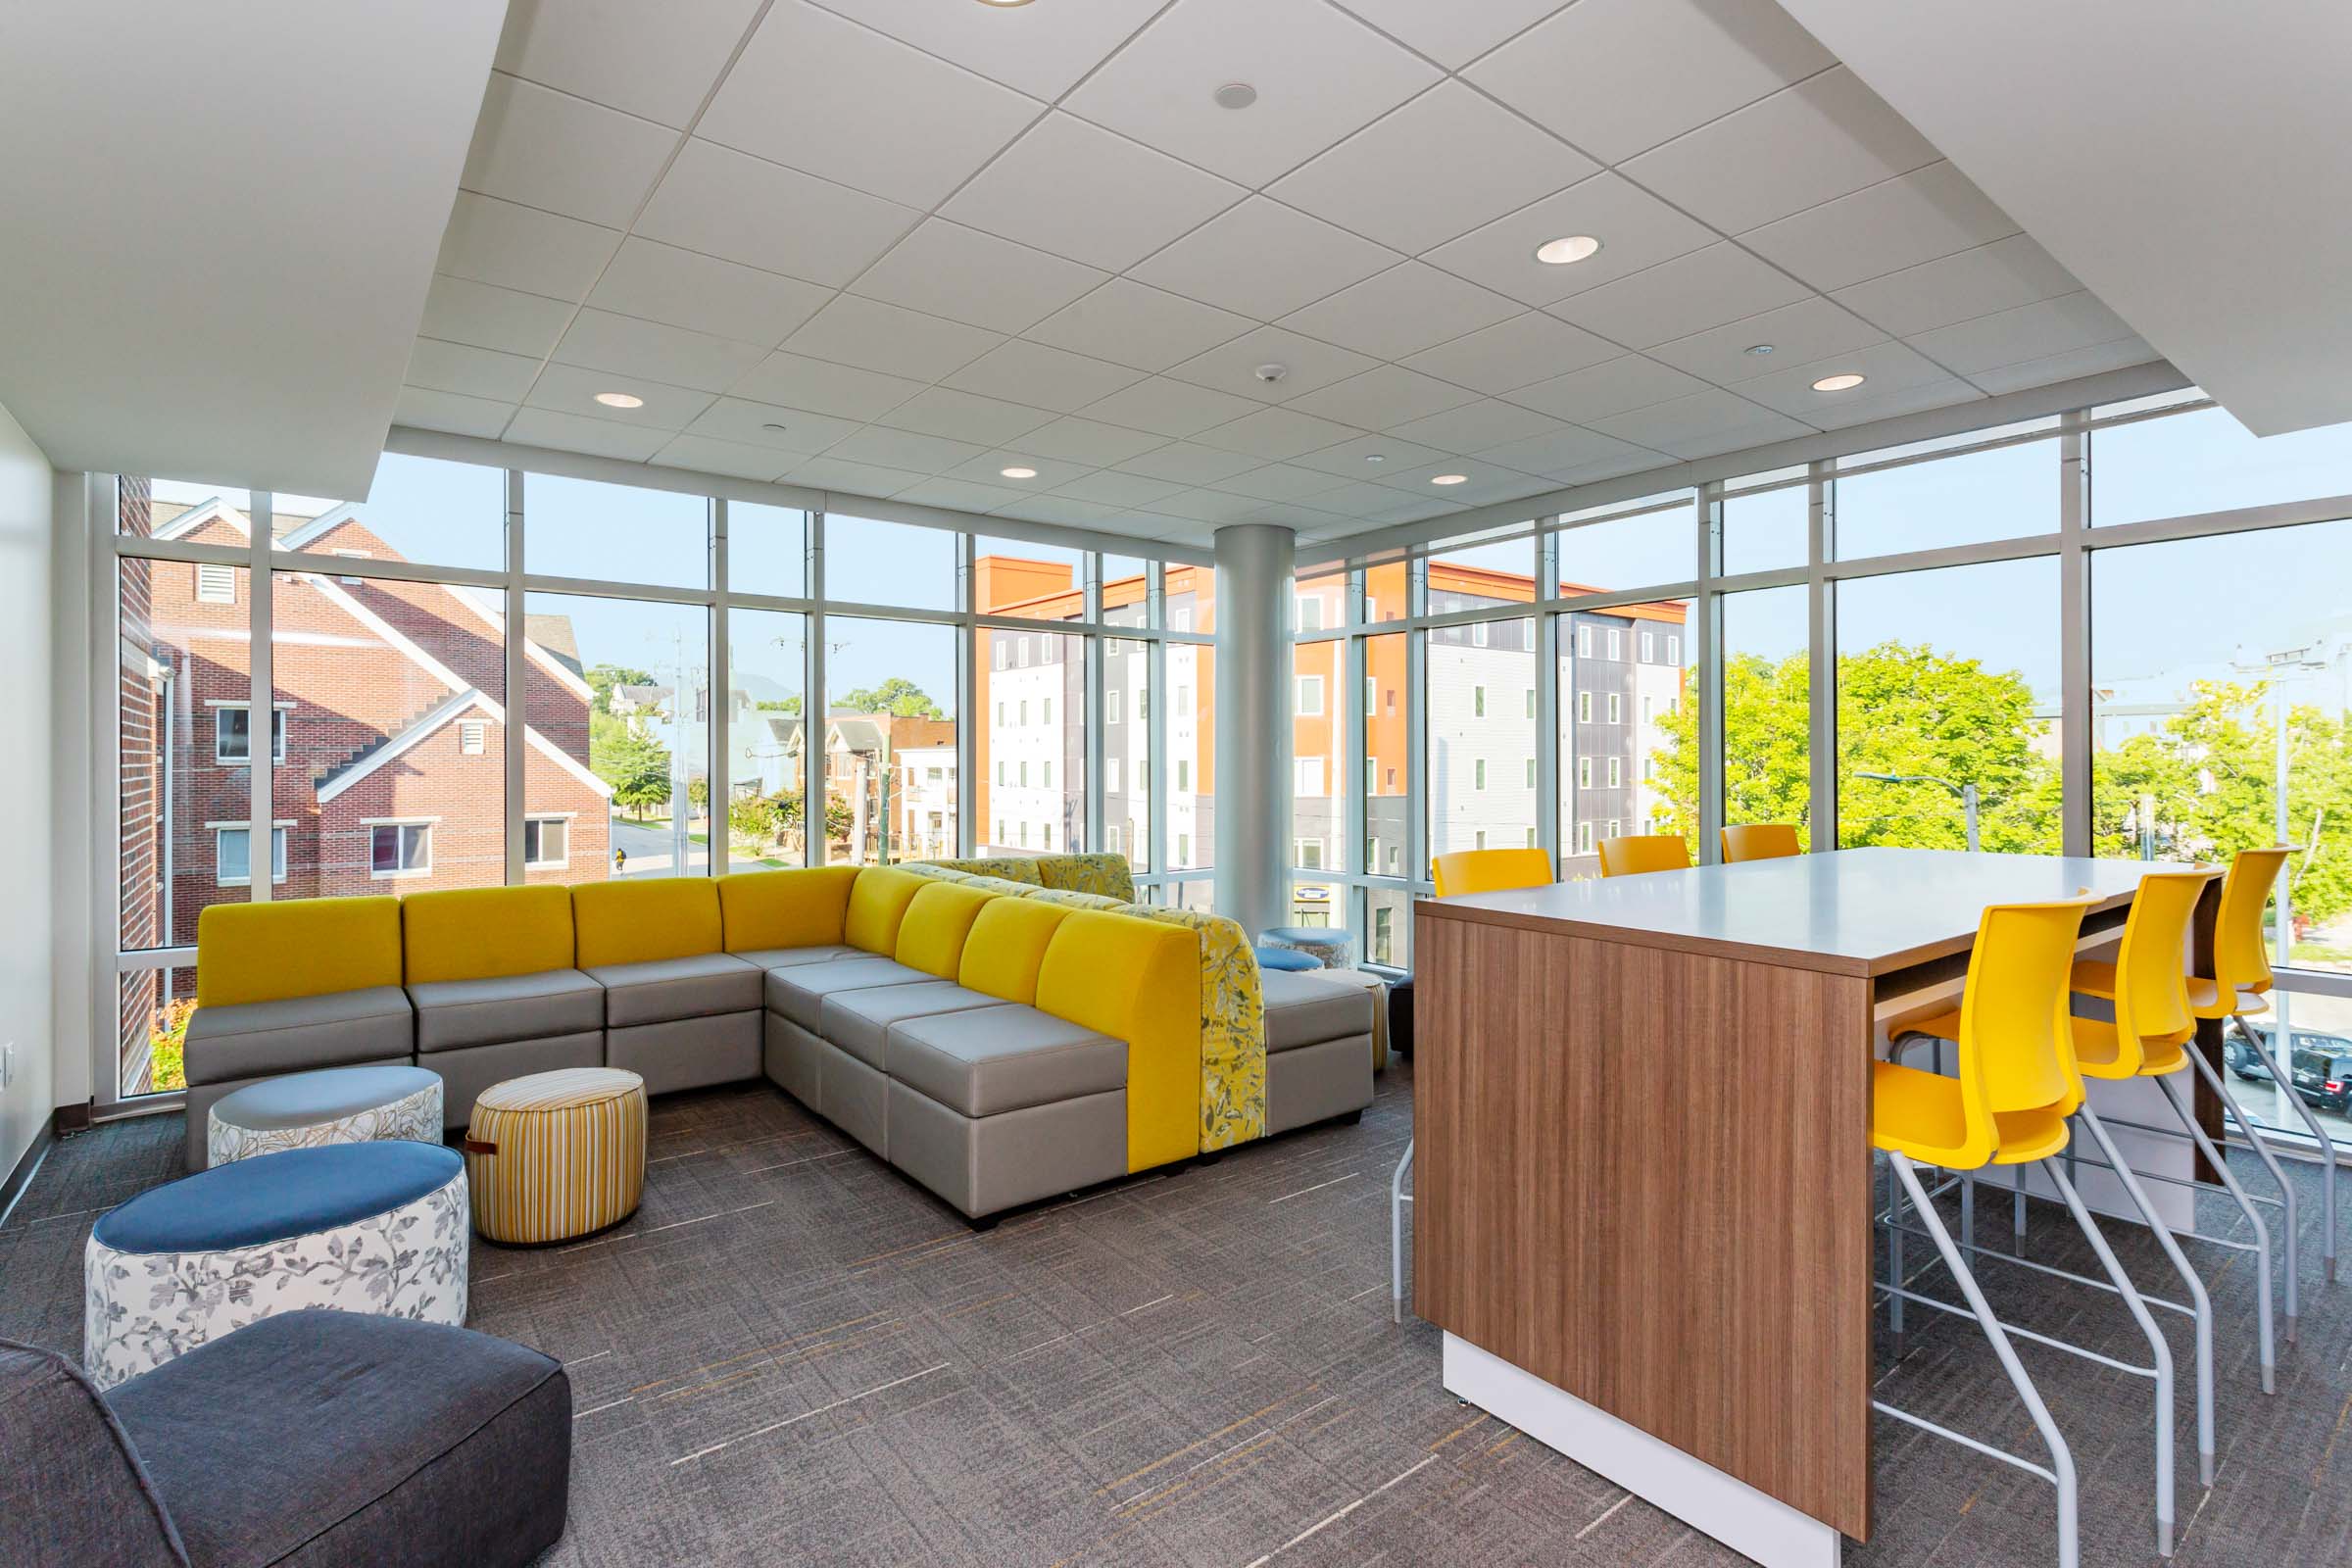 4 Trends in Student Housing That are Impacting Higher Education Projects